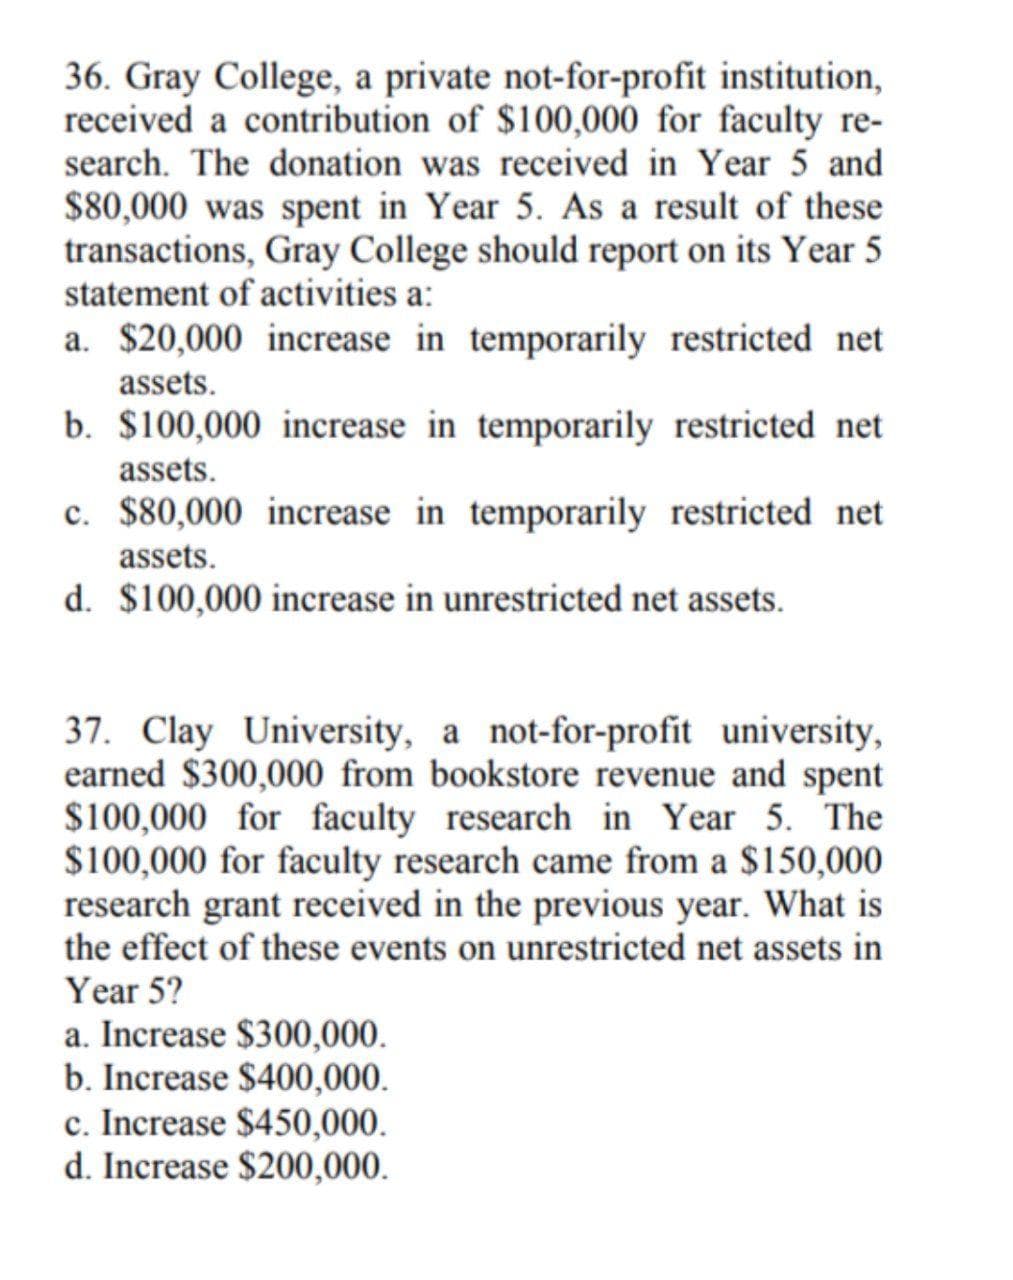 36. Gray College, a private not-for-profit institution,
received a contribution of $100,000 for faculty re-
search. The donation was received in Year 5 and
$80,000 was spent in Year 5. As a result of these
transactions, Gray College should report on its Year 5
statement of activities a:
a. $20,000 increase in temporarily restricted net
assets.
b. $100,000 increase in temporarily restricted net
assets.
c. $80,000 increase in temporarily restricted net
assets.
d. $100,000 increase in unrestricted net assets.
37. Clay University, a not-for-profit university,
earned $300,000 from bookstore revenue and spent
$100,000 for faculty research in Year 5. The
$100,000 for faculty research came from a $150,000
research grant received in the previous year. What is
the effect of these events on unrestricted net assets in
Year 5?
a. Increase $300,000.
b. Increase $400,000.
c. Increase $450,000.
d. Increase $200,000.
